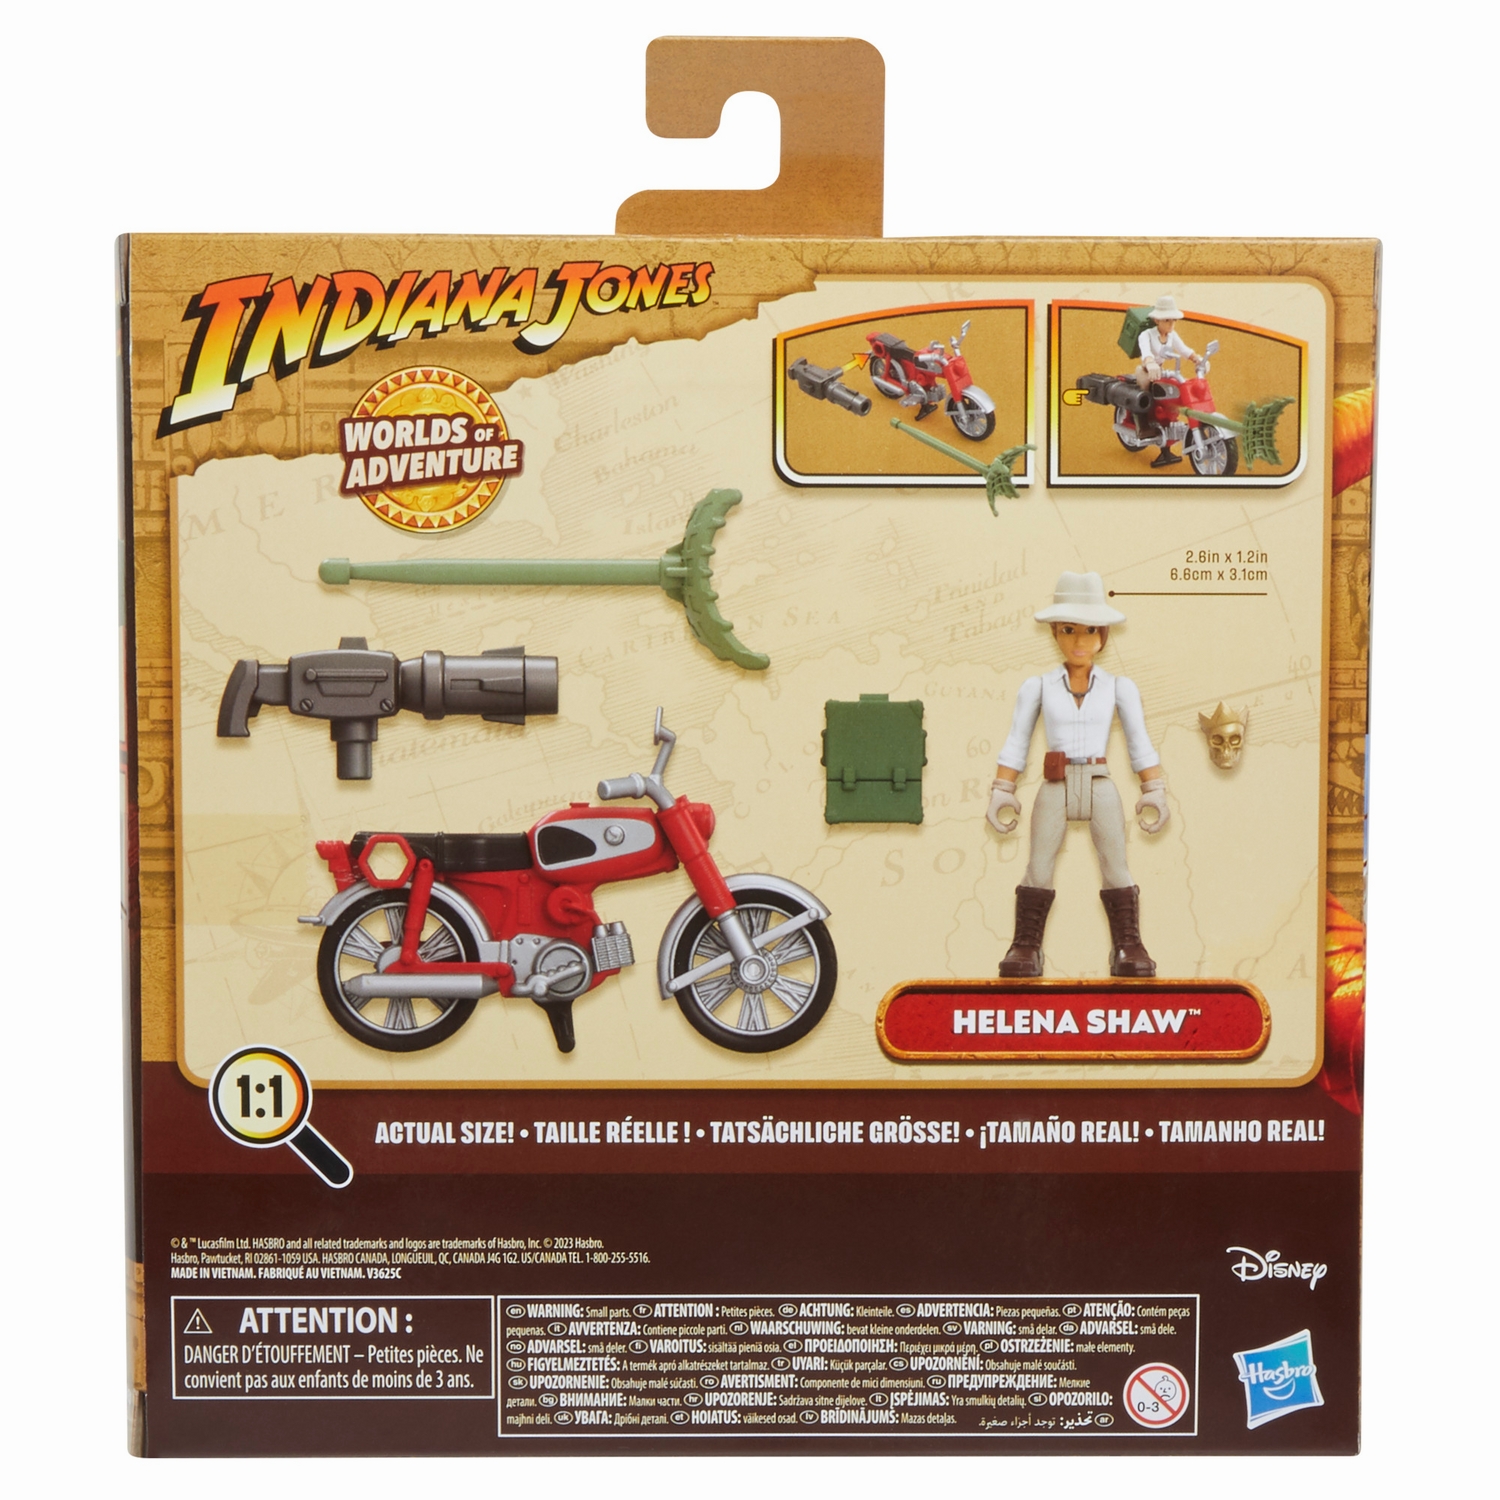 INDIANA JONES WORLDS OF ADVENTURE HELENA SHAW WITH MOTORCYCLE - Package 2.jpg